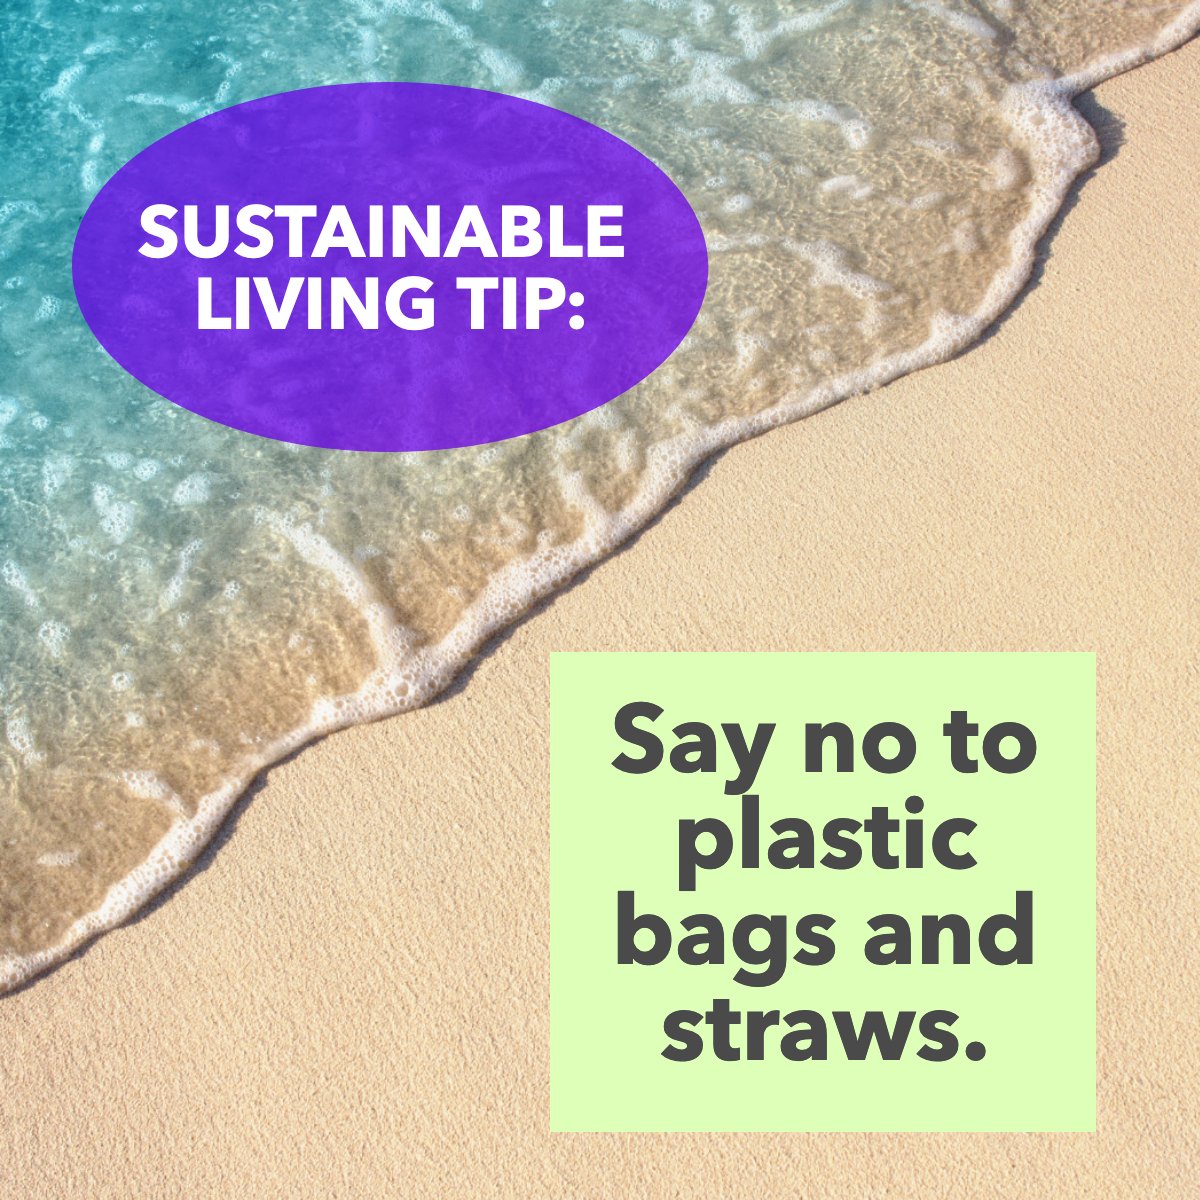 'Never doubt that a small group of thoughtful, committed citizens can change the world; indeed it’s the only thing that ever has.'
– Margaret Mead

#sustainablelifestyle #sustainable #sustainablity #noplastic #savethebeaches 
 #riscosells #theriscogroup #kwmainline